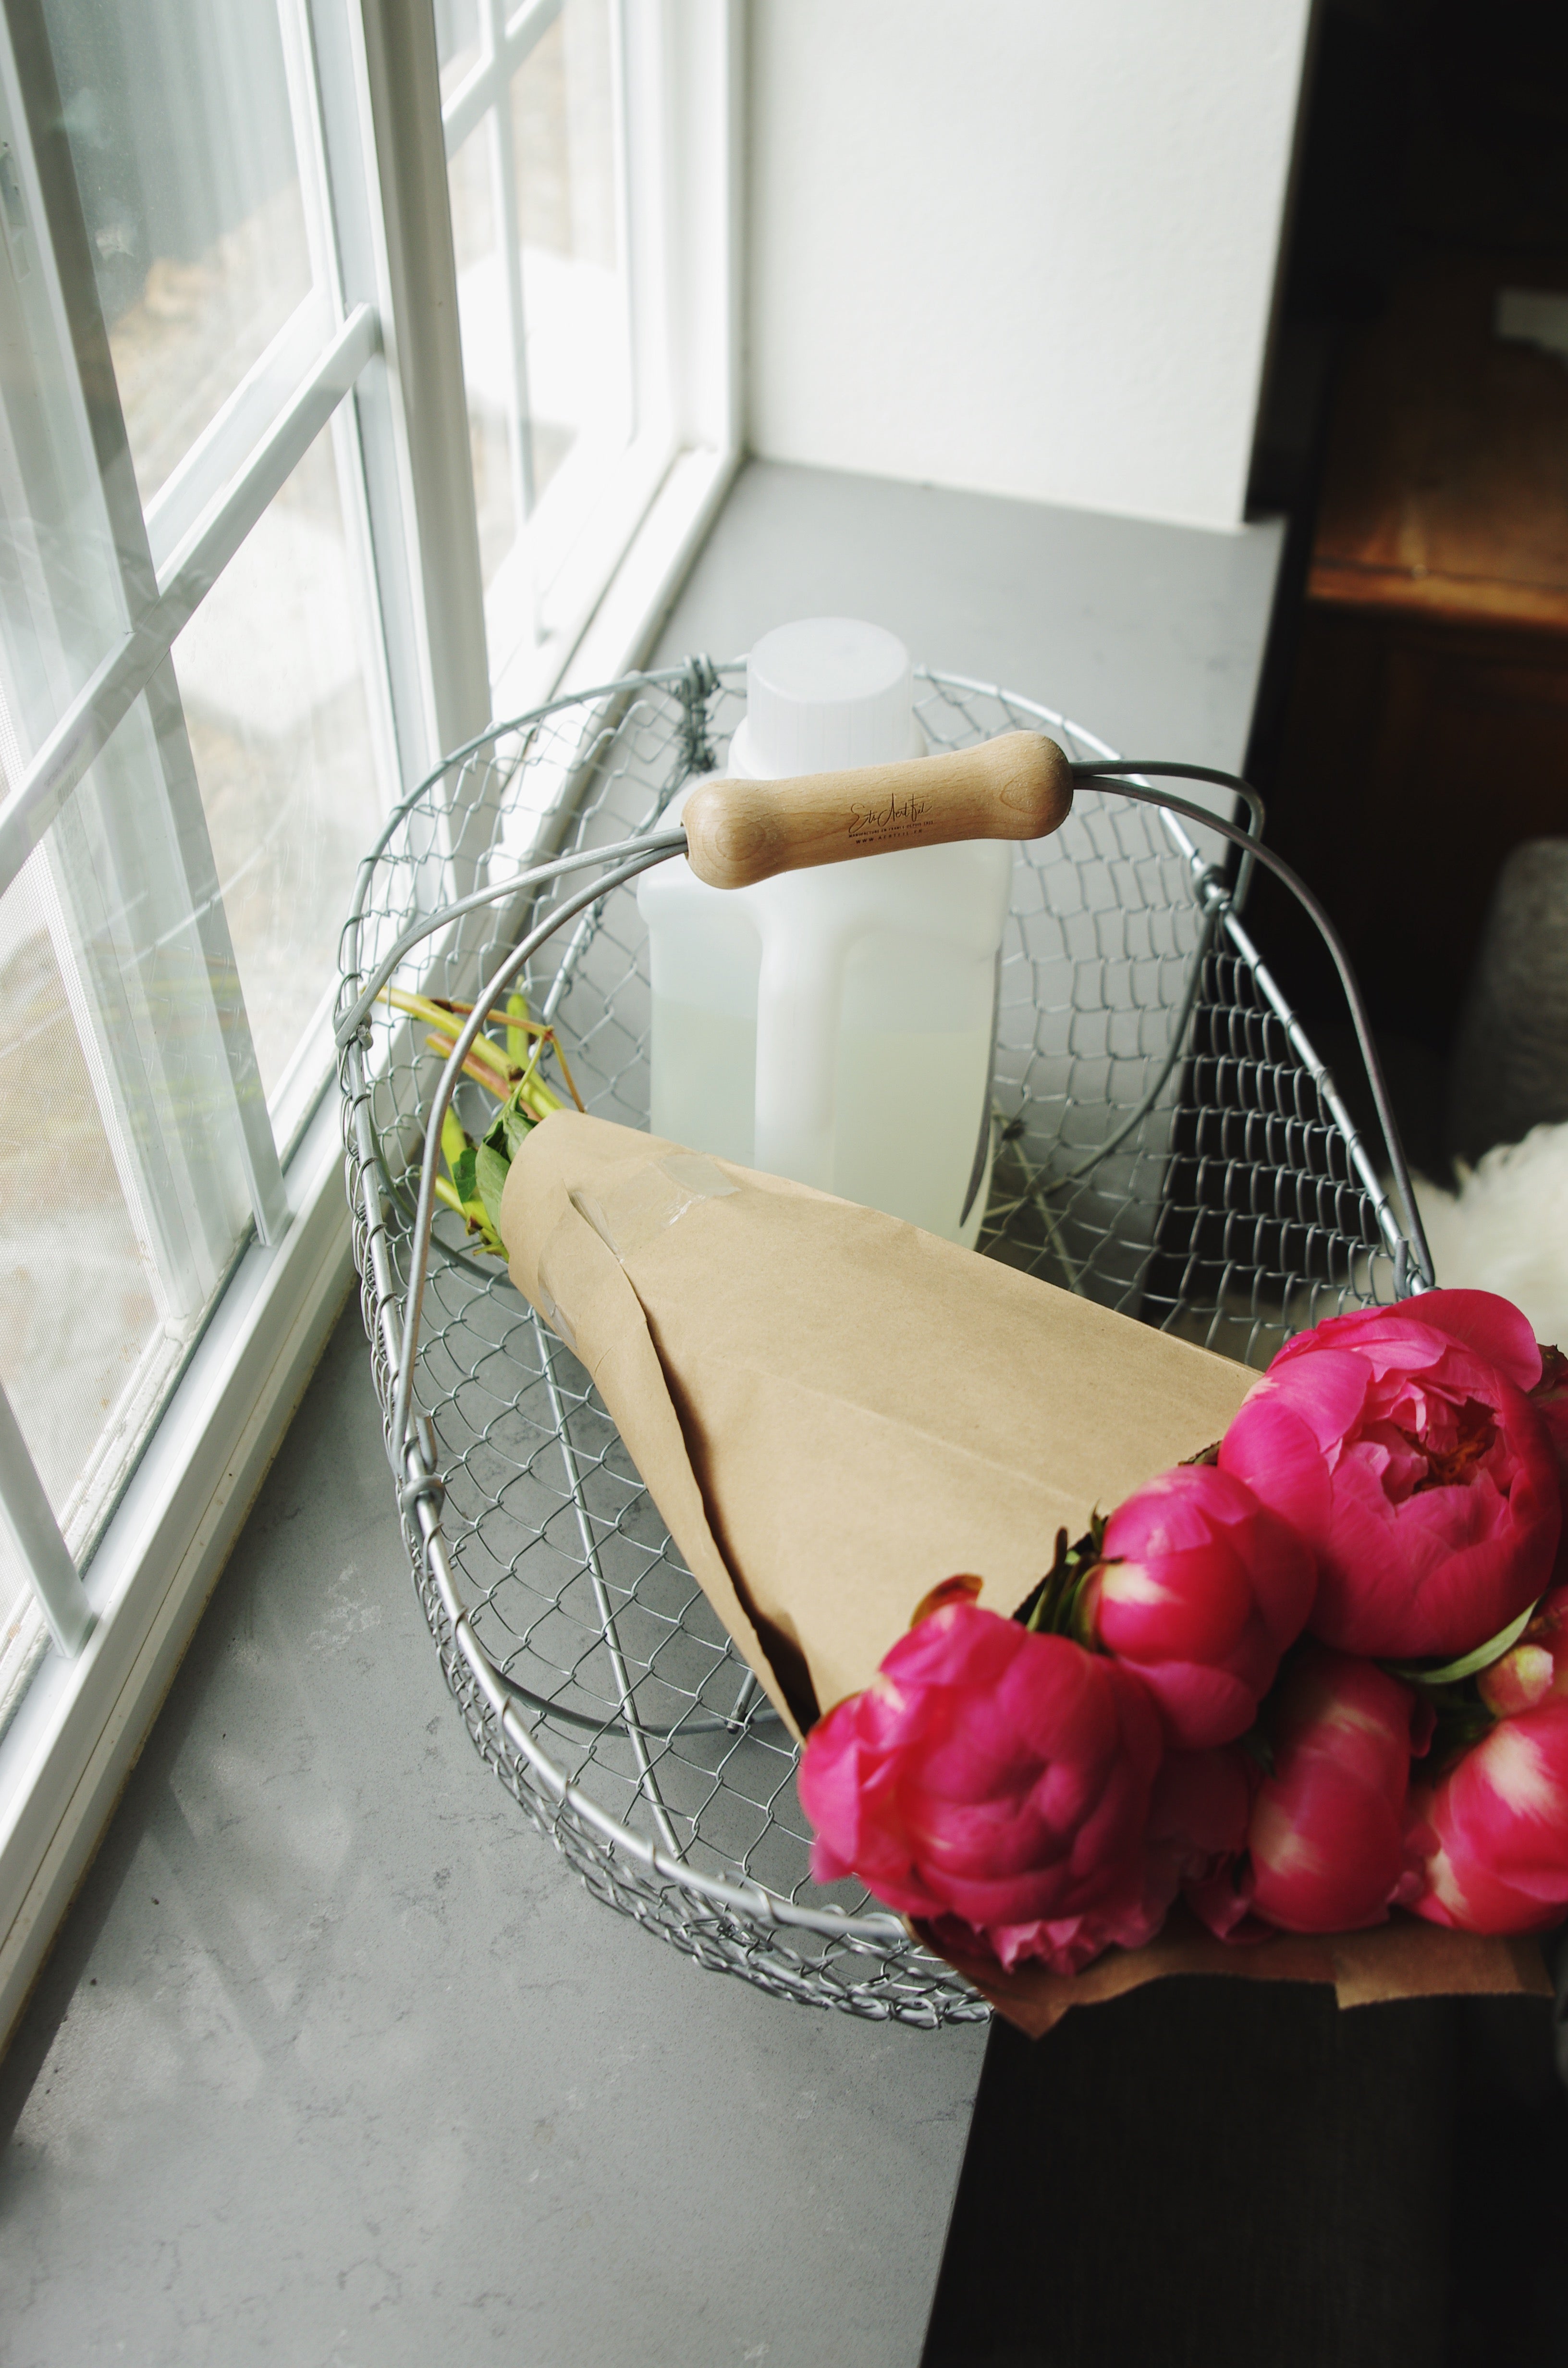 Atelier Aertgeerts French Harvesting Basket Atelier Aertgeerts Brand_Atelier Aertgeerts Home_Decor Kitchen_Storage New Arrivals A67F9AB9-52E0-4840-8372-61EB120A776E